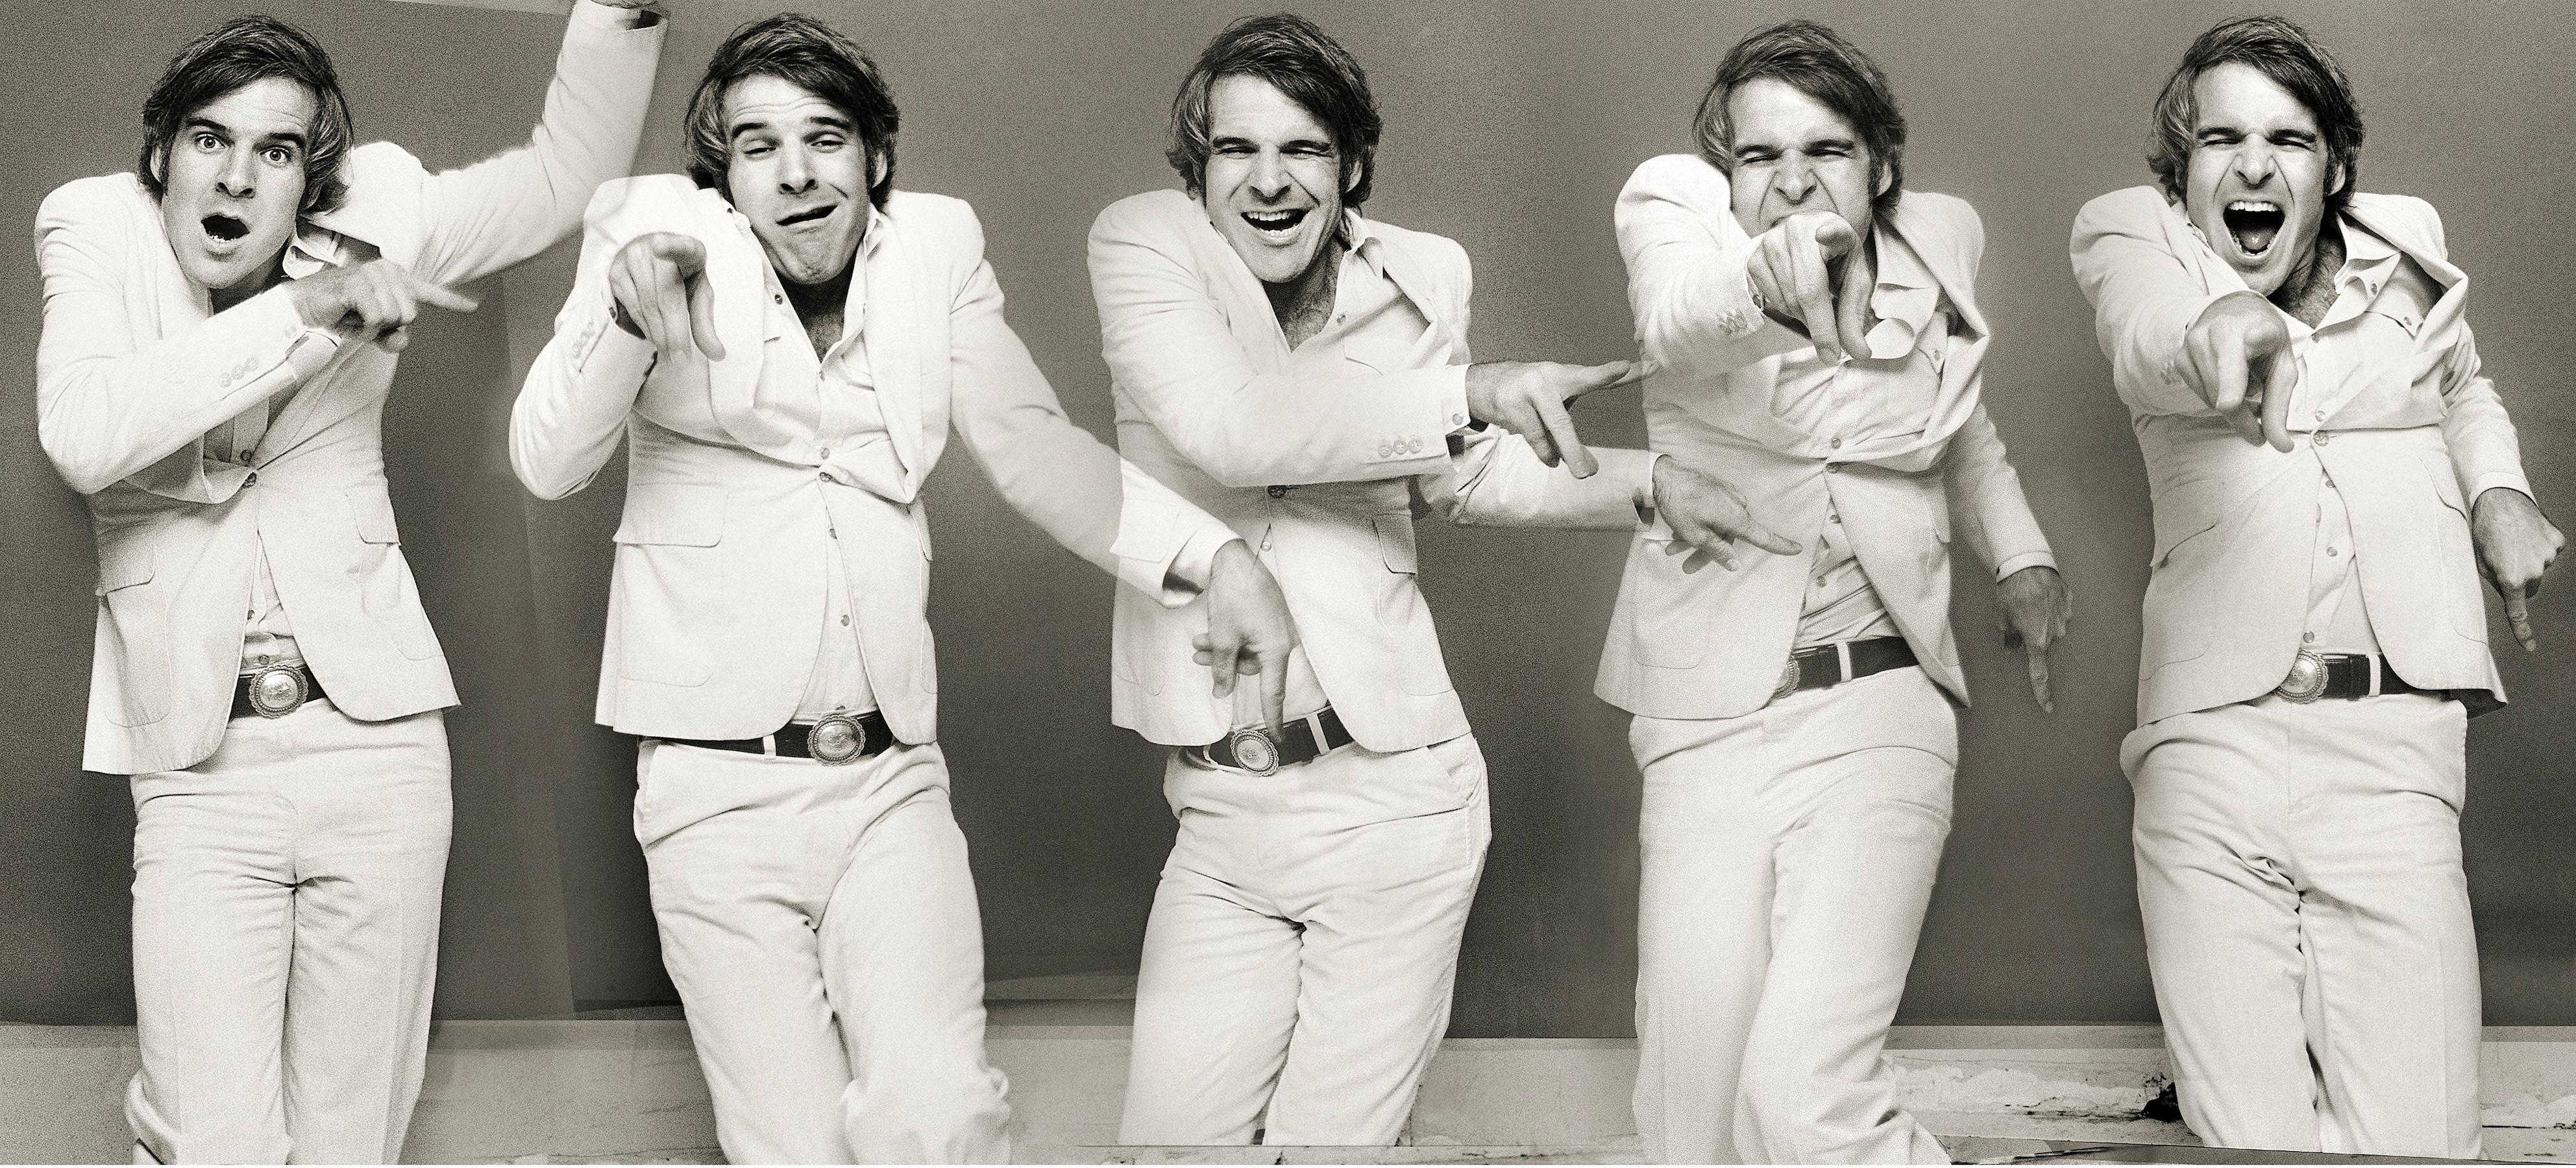 Norman Seeff Black and White Photograph - Steve Martin, “Let’s Get Small Sequence” 1974